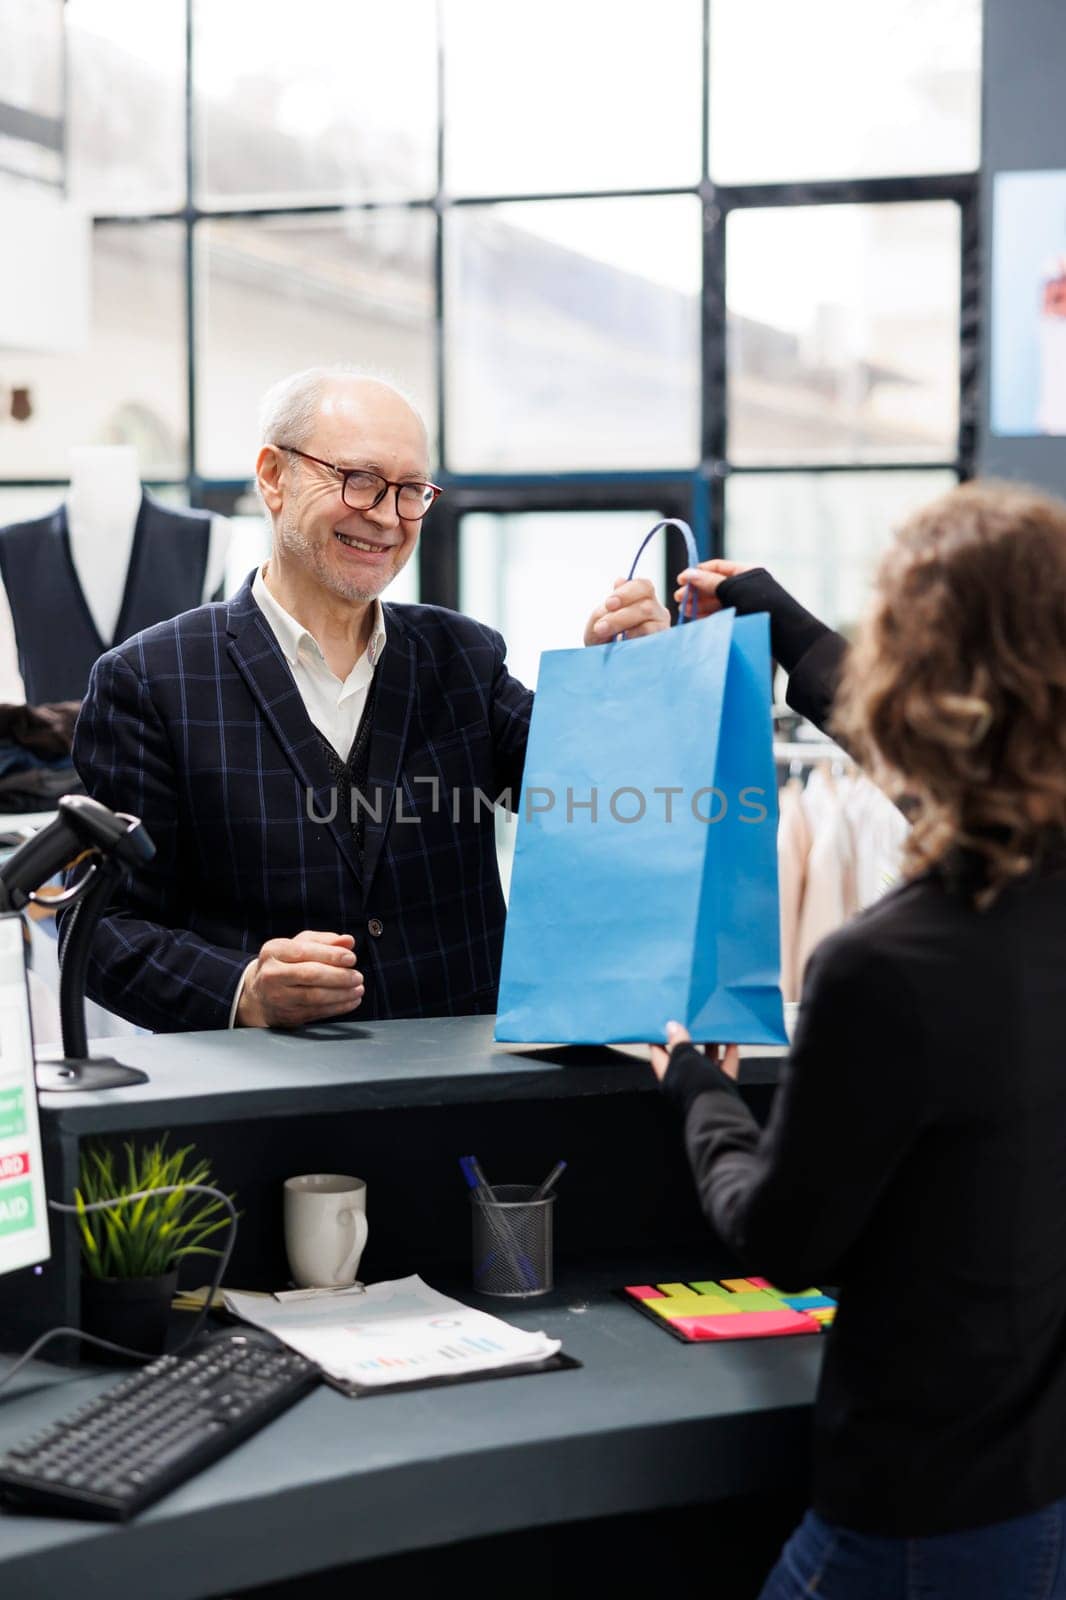 Senior client taking shopping bag from store worker, standing at counter desk paying for purchase in fashion boutique. Elderly man buying modern clothes making electronic transaction at mall